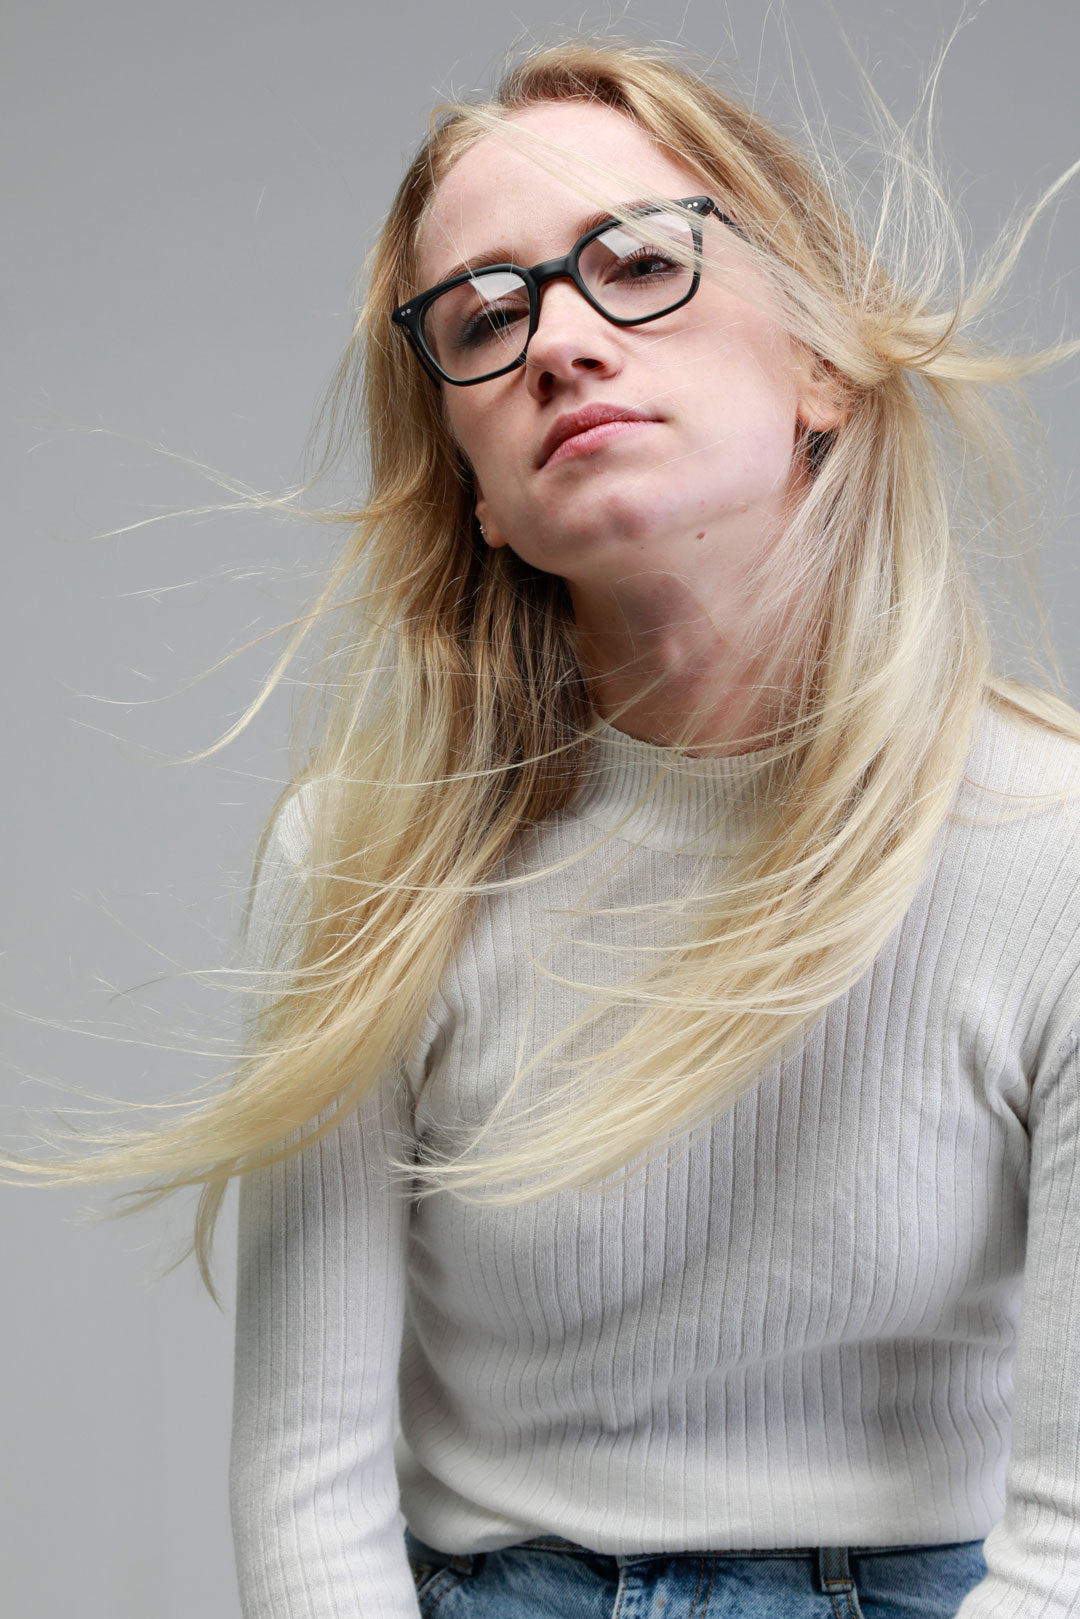 Young  female with dark square glasses with her blonde hair being blown about